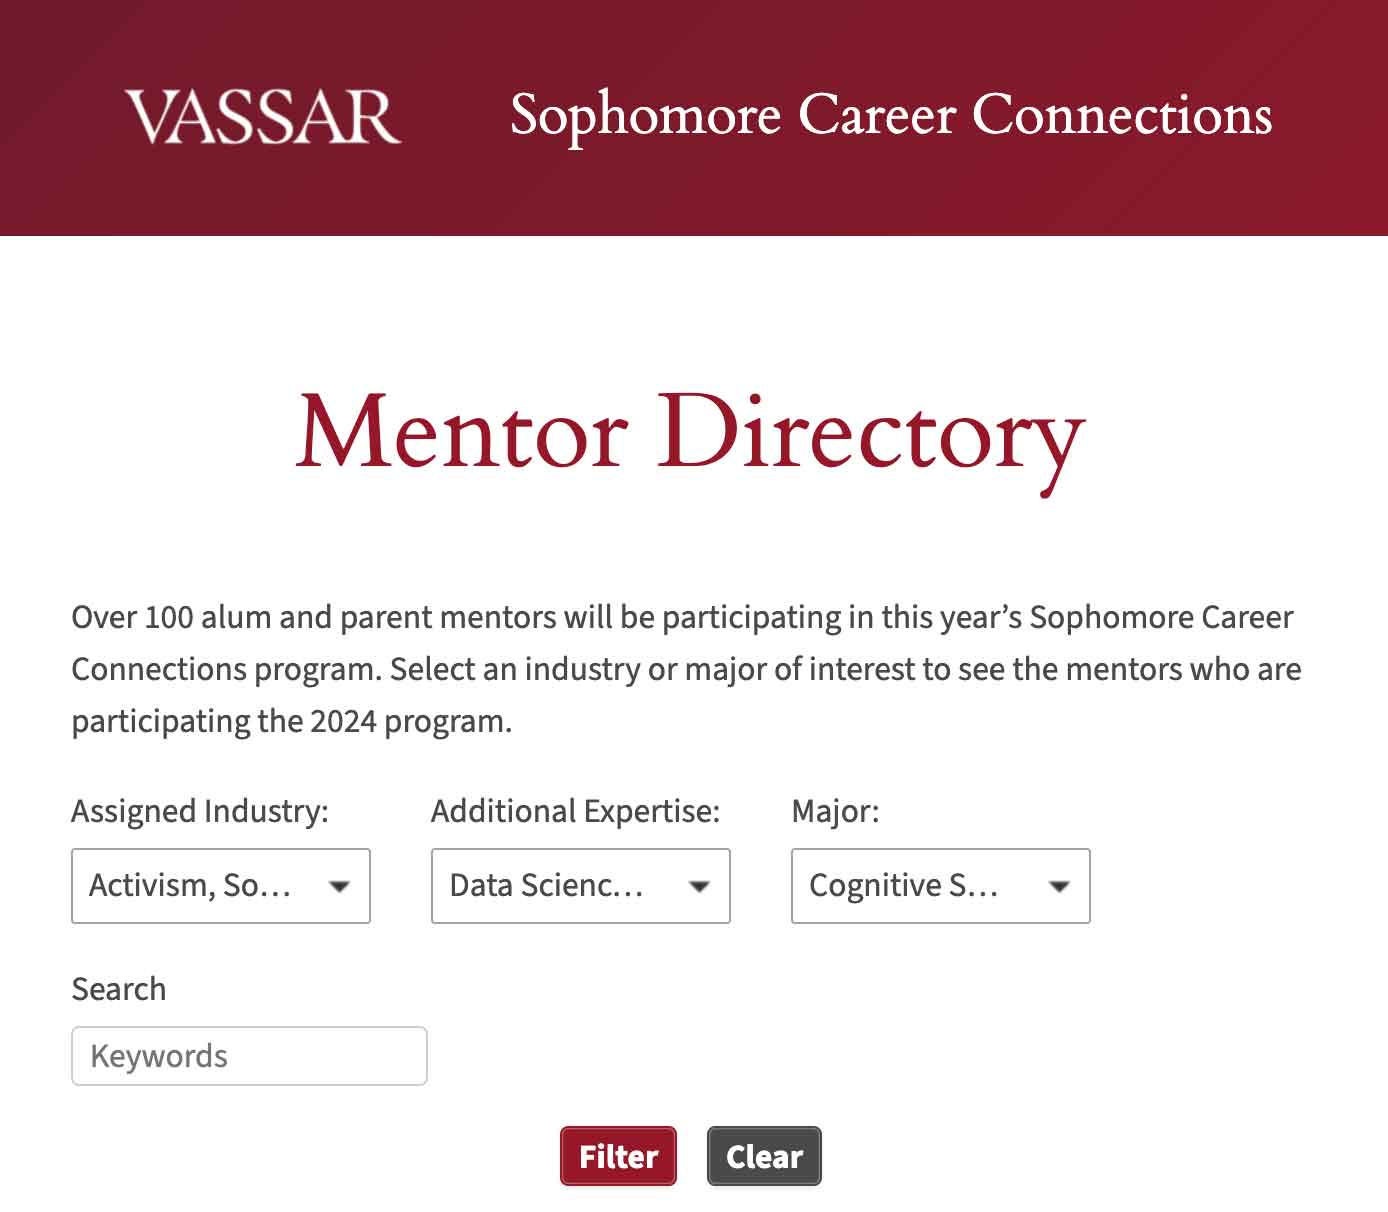 Screenshot of and link to the Vassar Sophomore Career Connections Mentor Directory with pulldown menus and search buttons